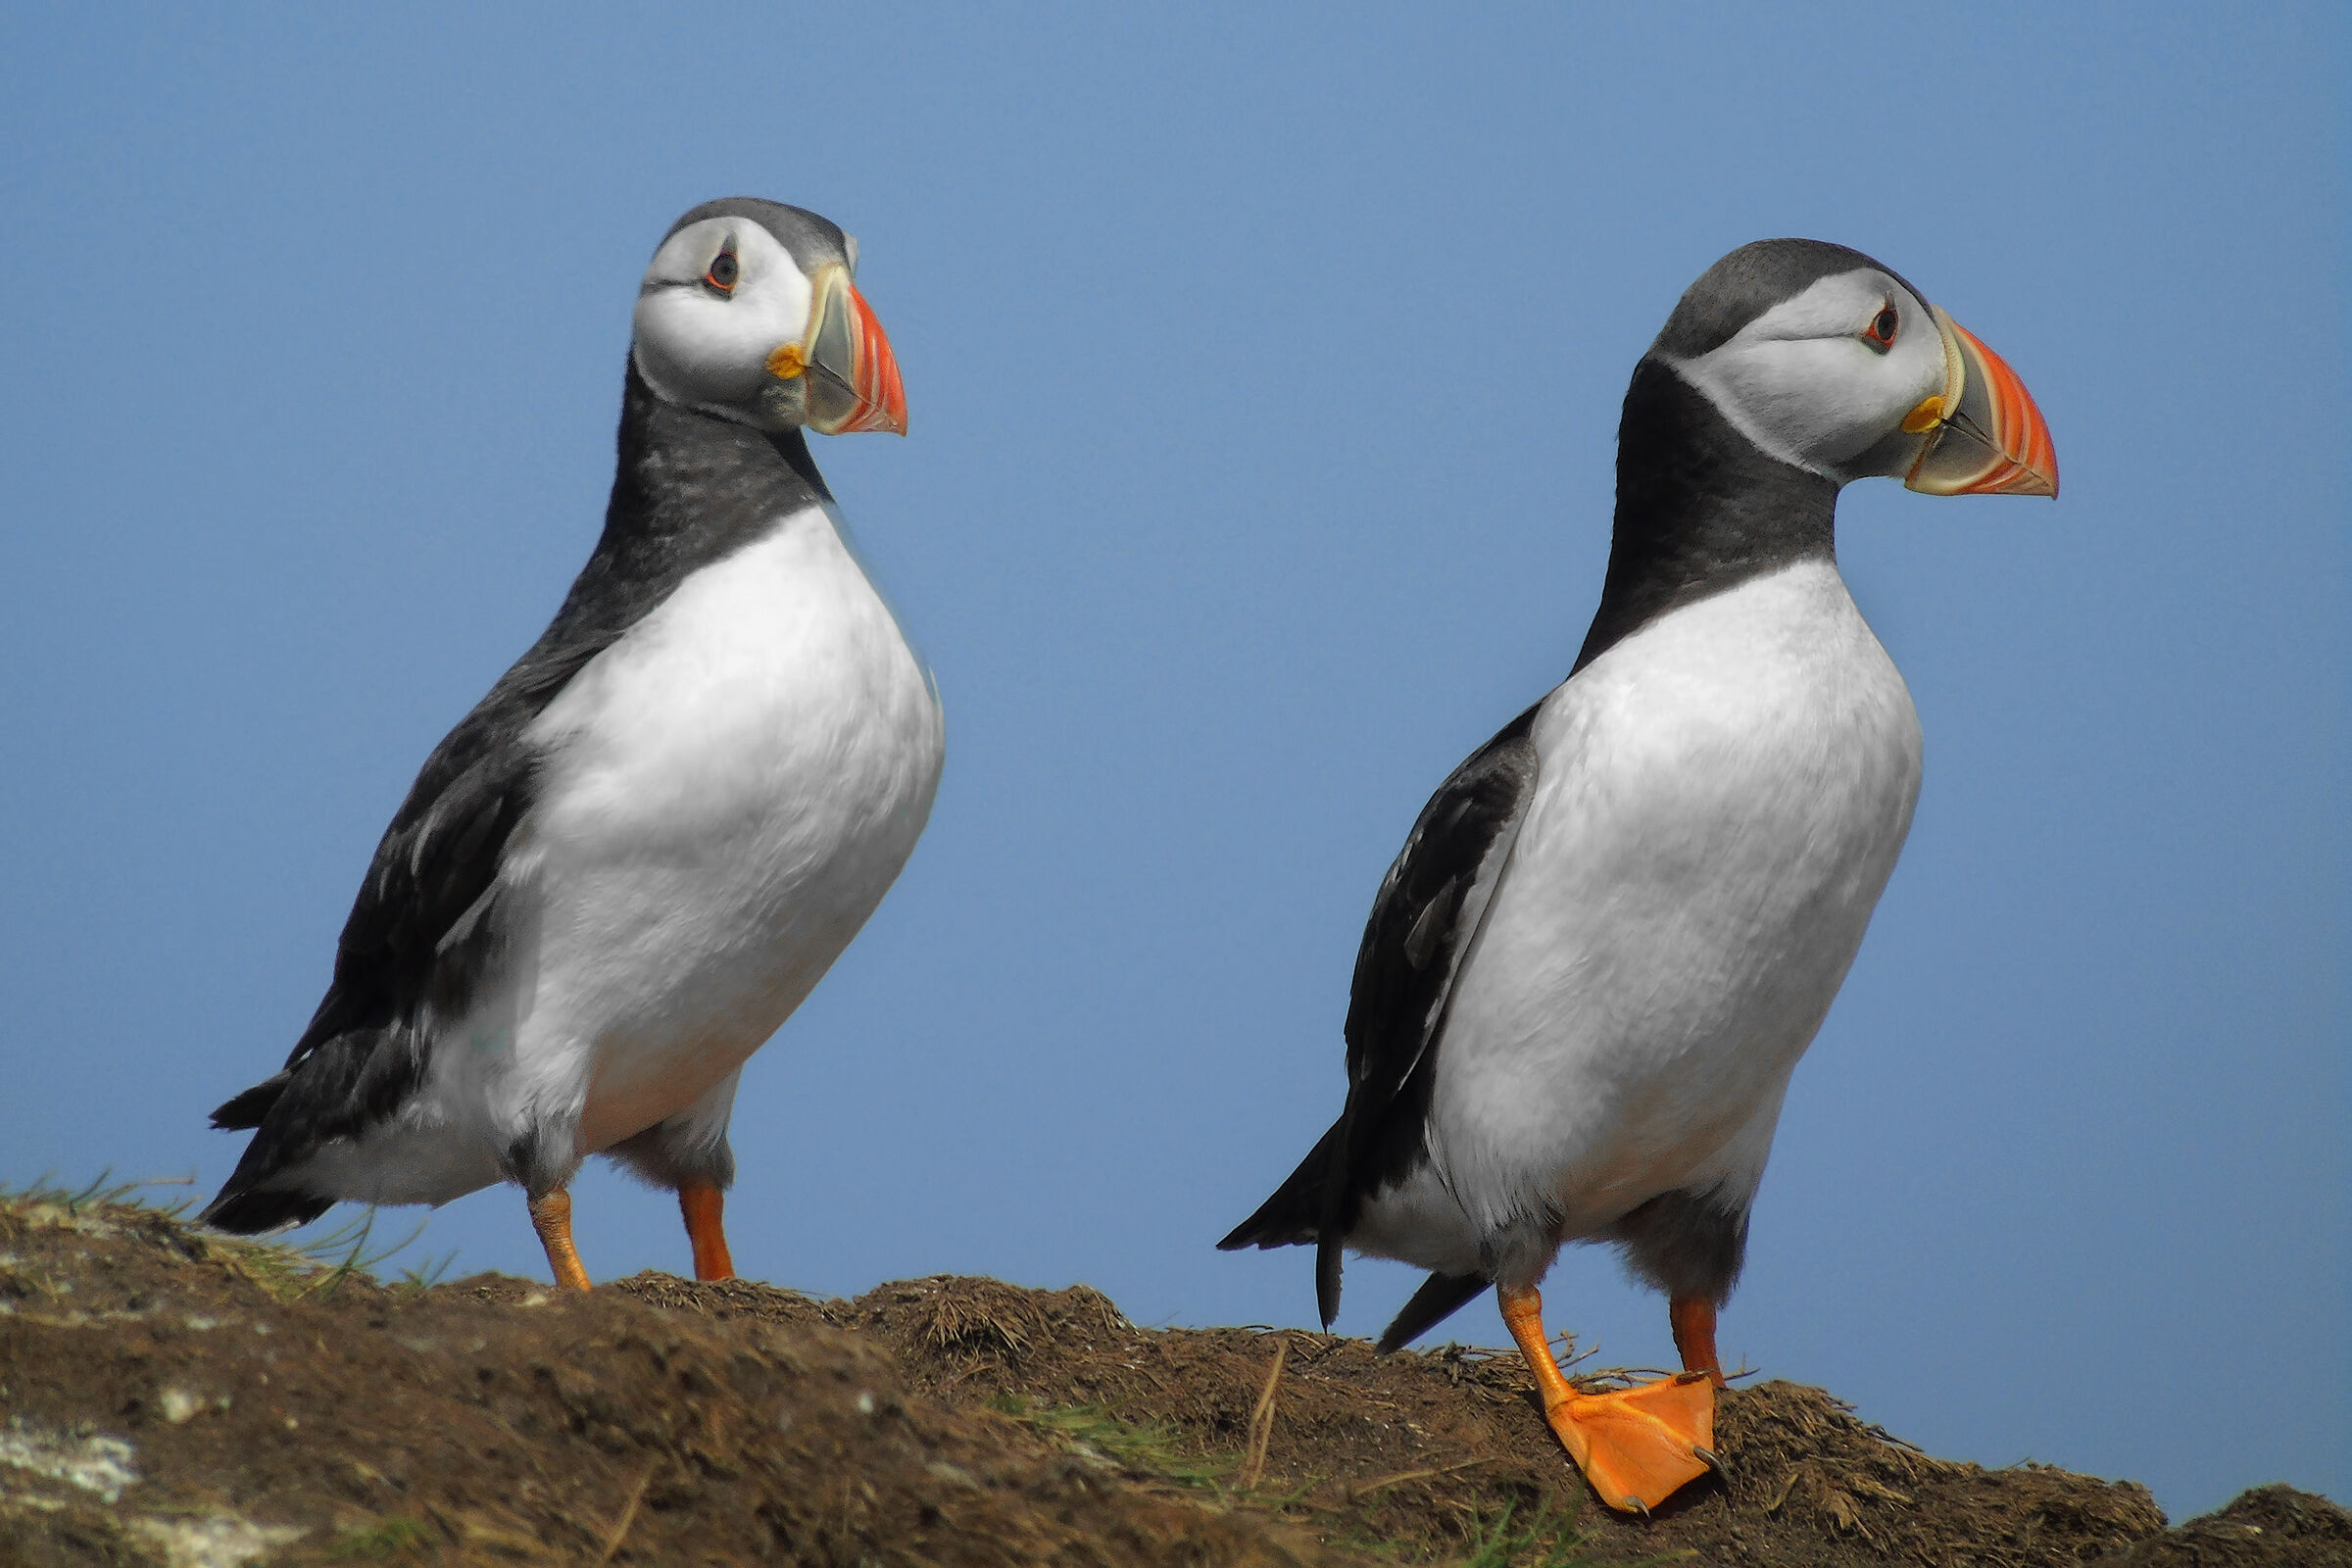 The usual adorable puffins...